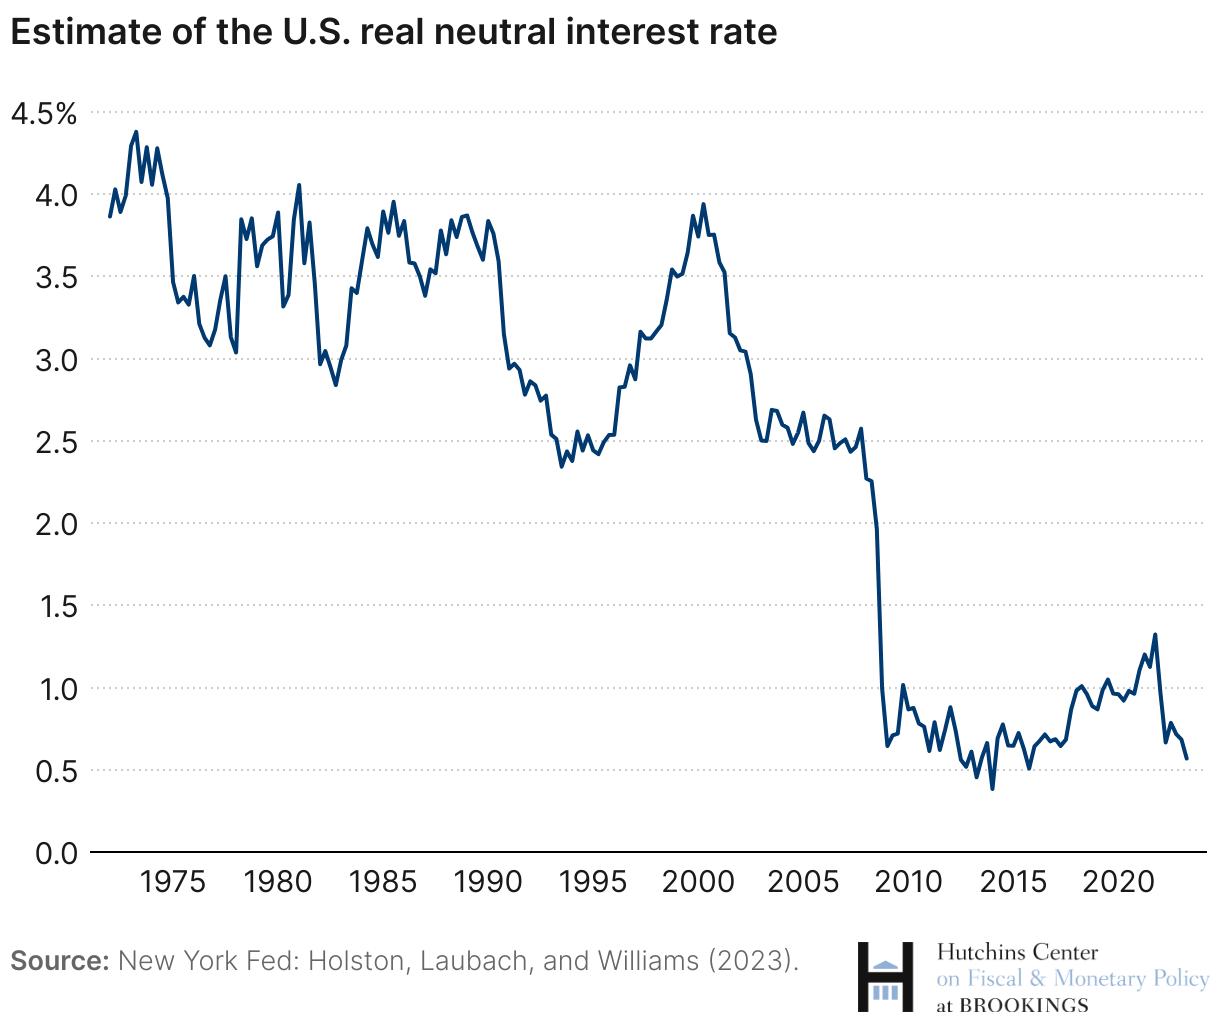 Estimate of the real neutral rate of interest declined considerably in 2008 and has remained low since then.